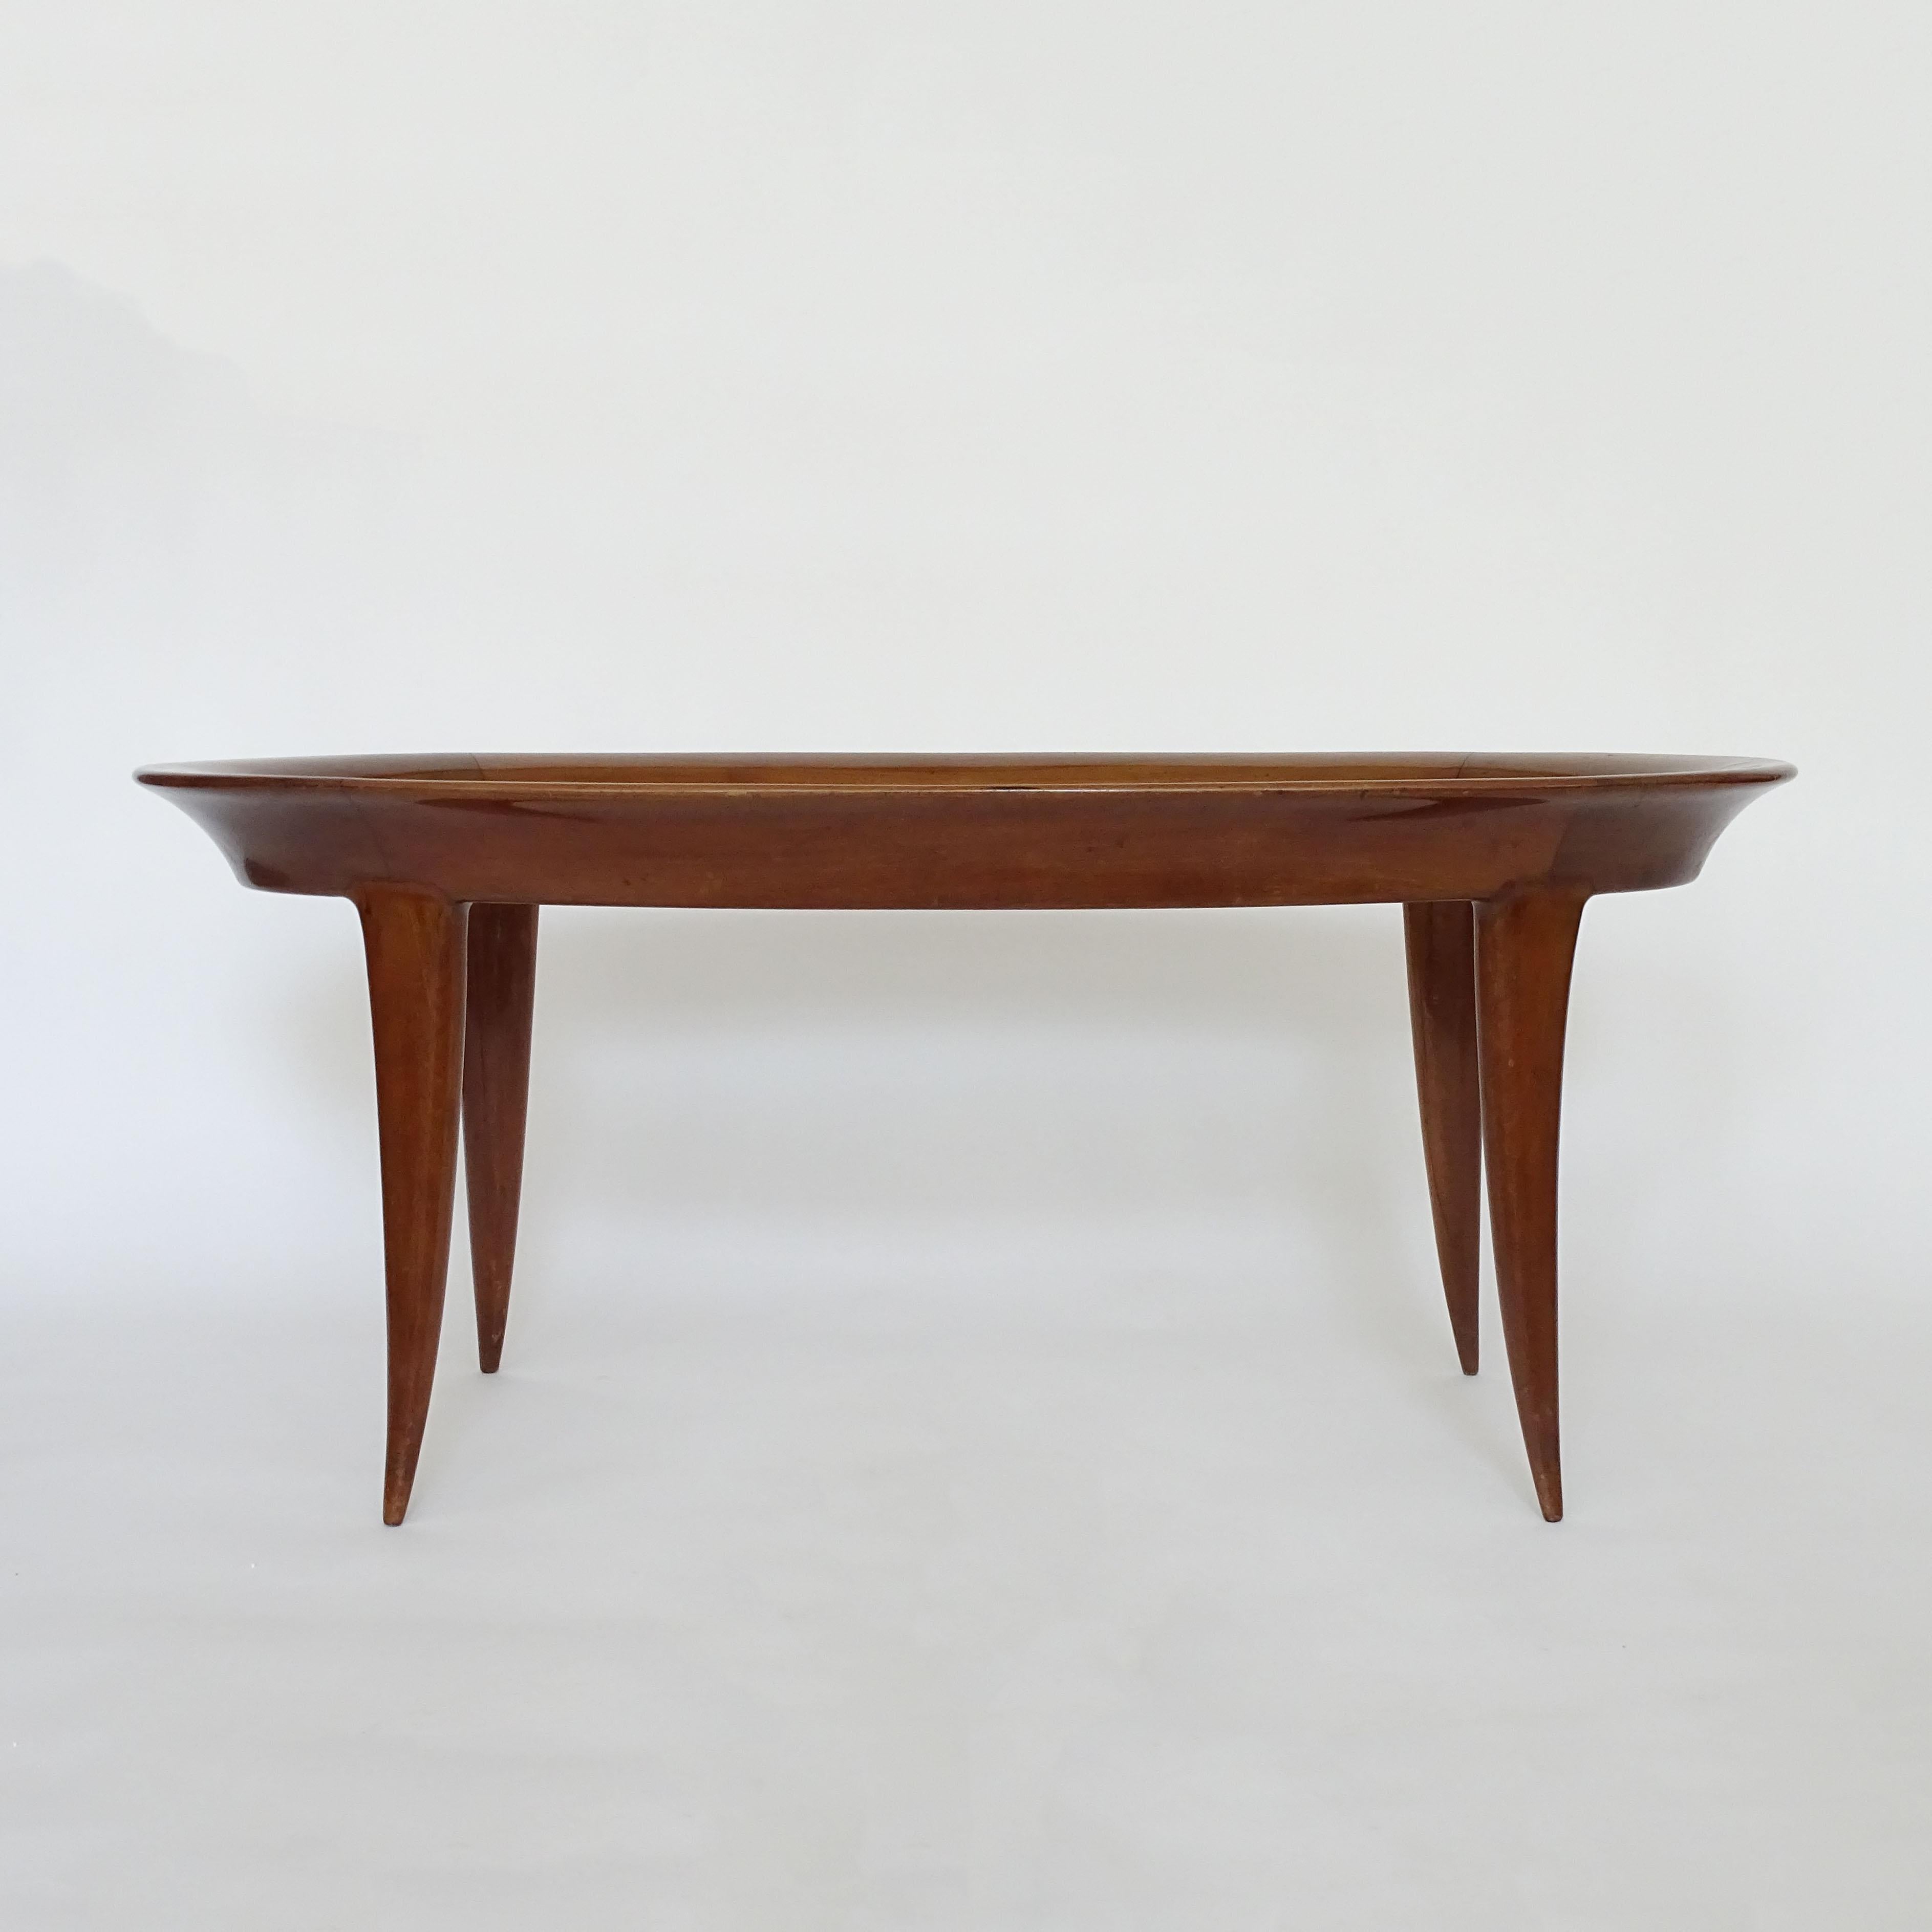 Beautiful Italian 1940s sculptural oval coffee table attributed to Fontana Arte.
The outer wood frame is 10 cm of curved wood, beautifully executed with outer going curved legs.
A real stunner.

